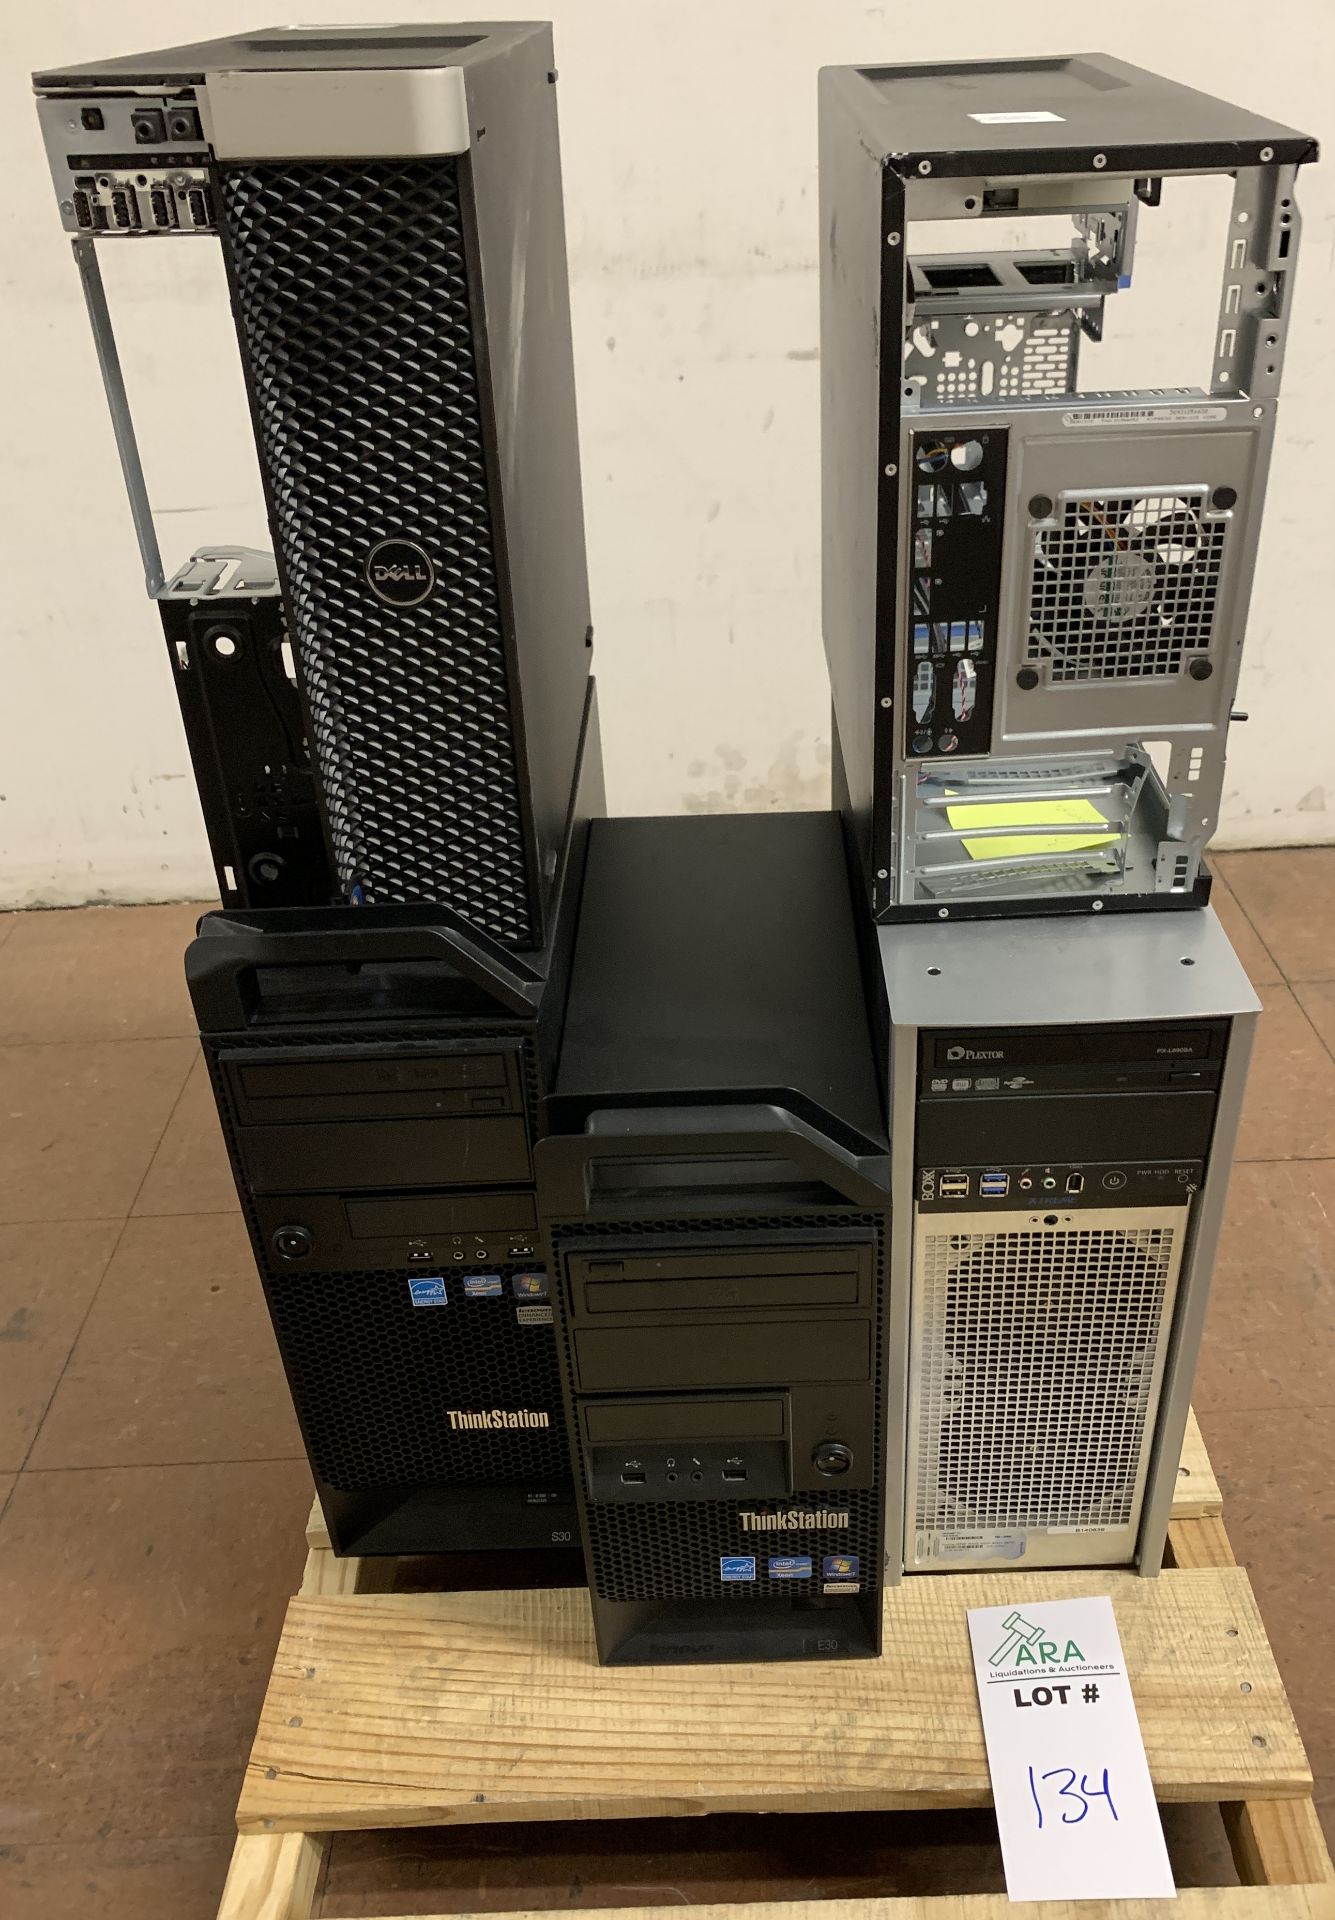 5 COMPUTER BARE BONE TOWERS FOR PARTS AND REBUILDING MOST MISSING SOMETHING